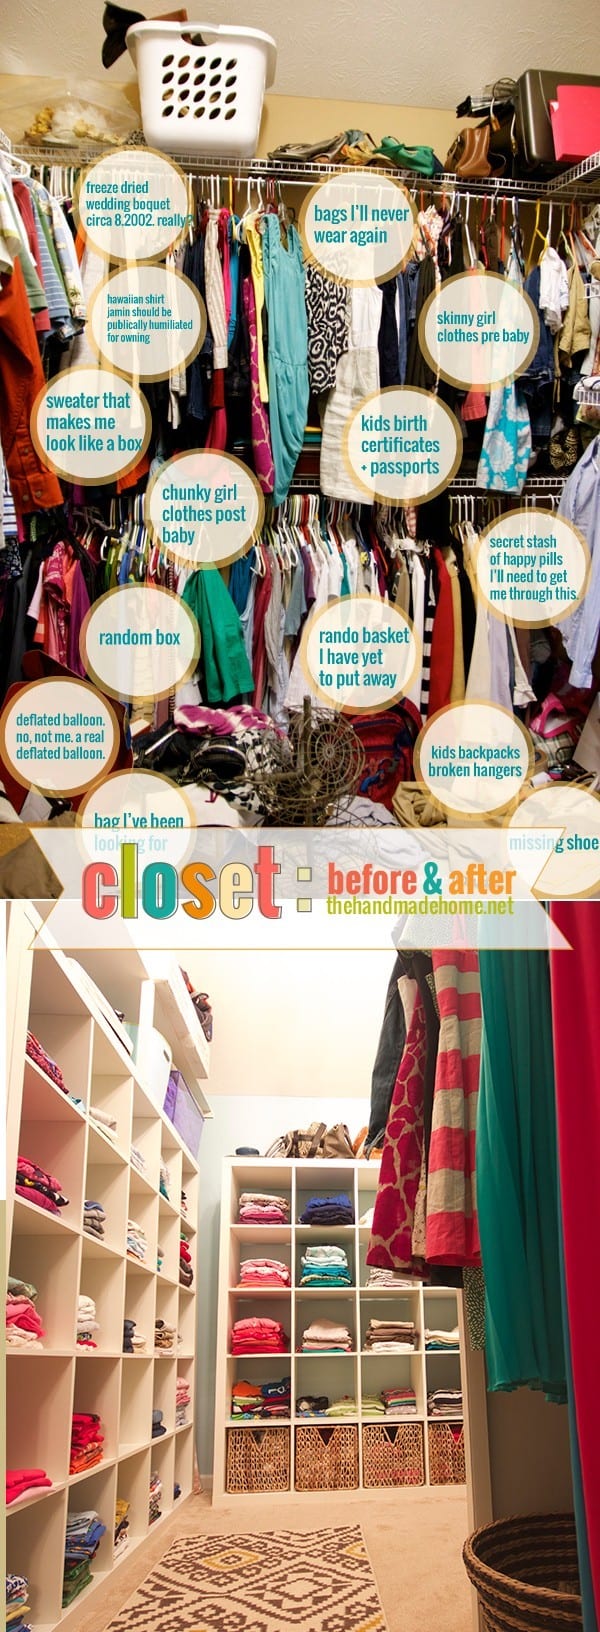 closet_before_and_after